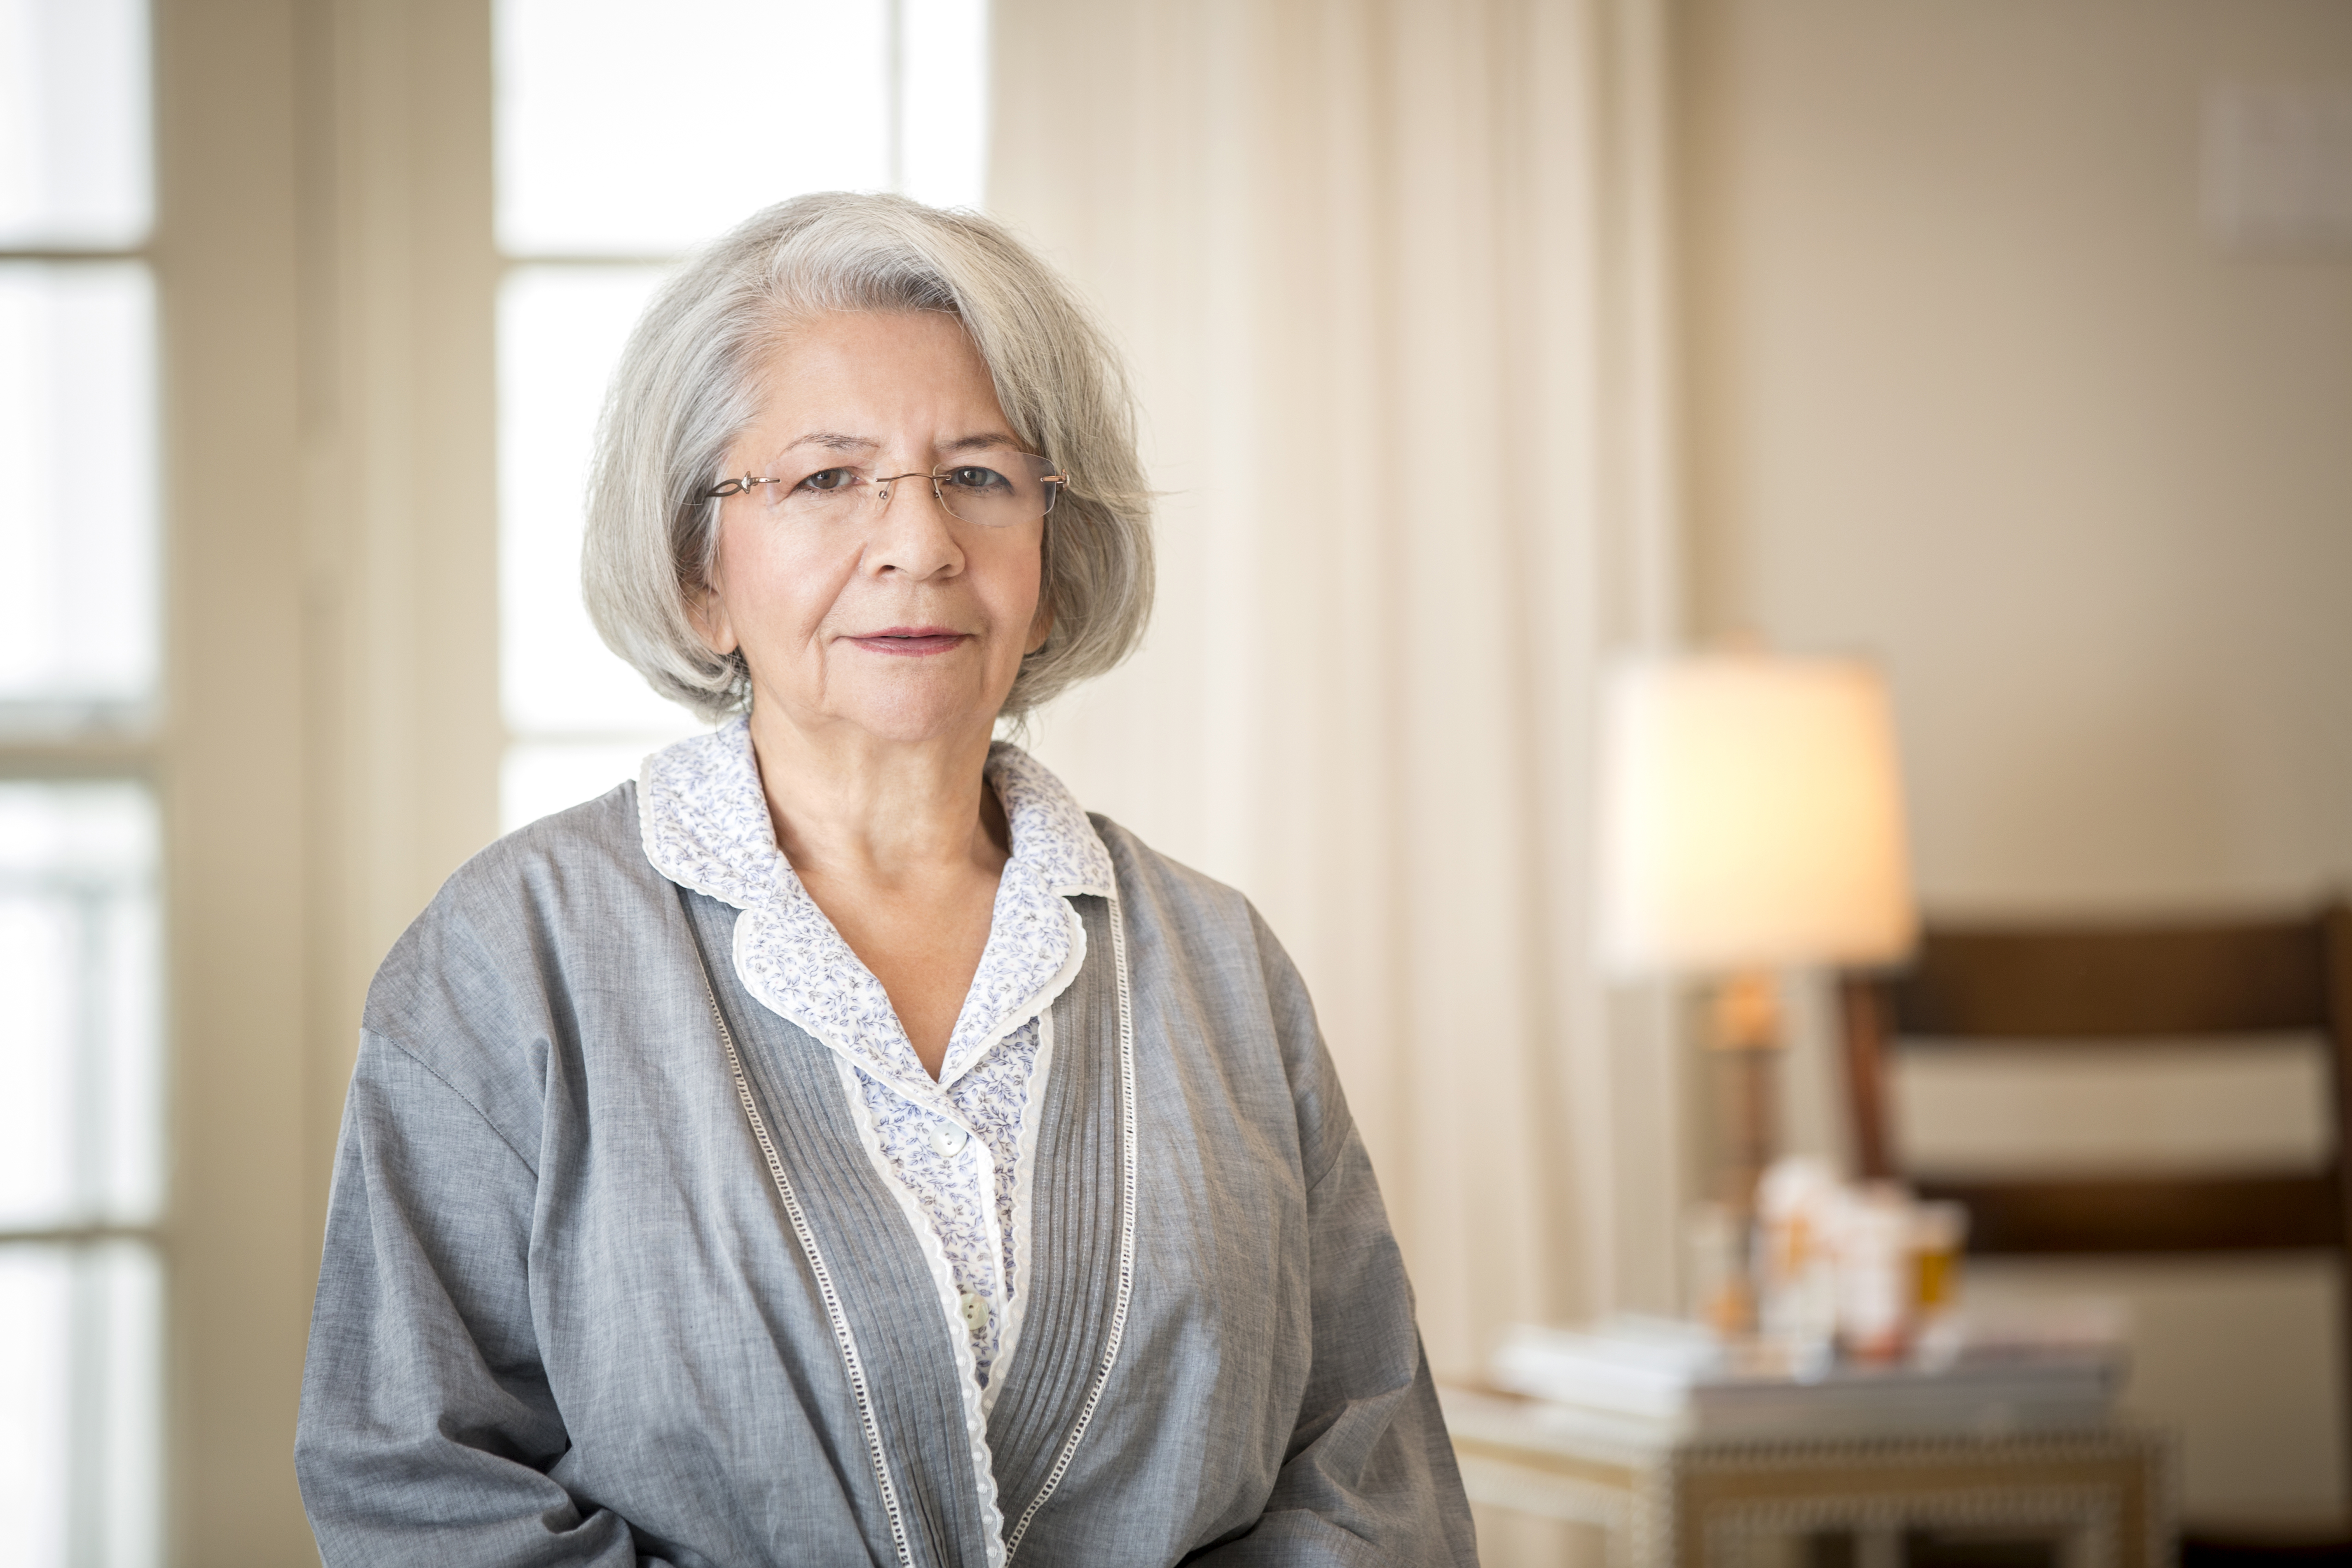 Older frowning Hispanic woman wearing bathrobe | Source: Getty Images